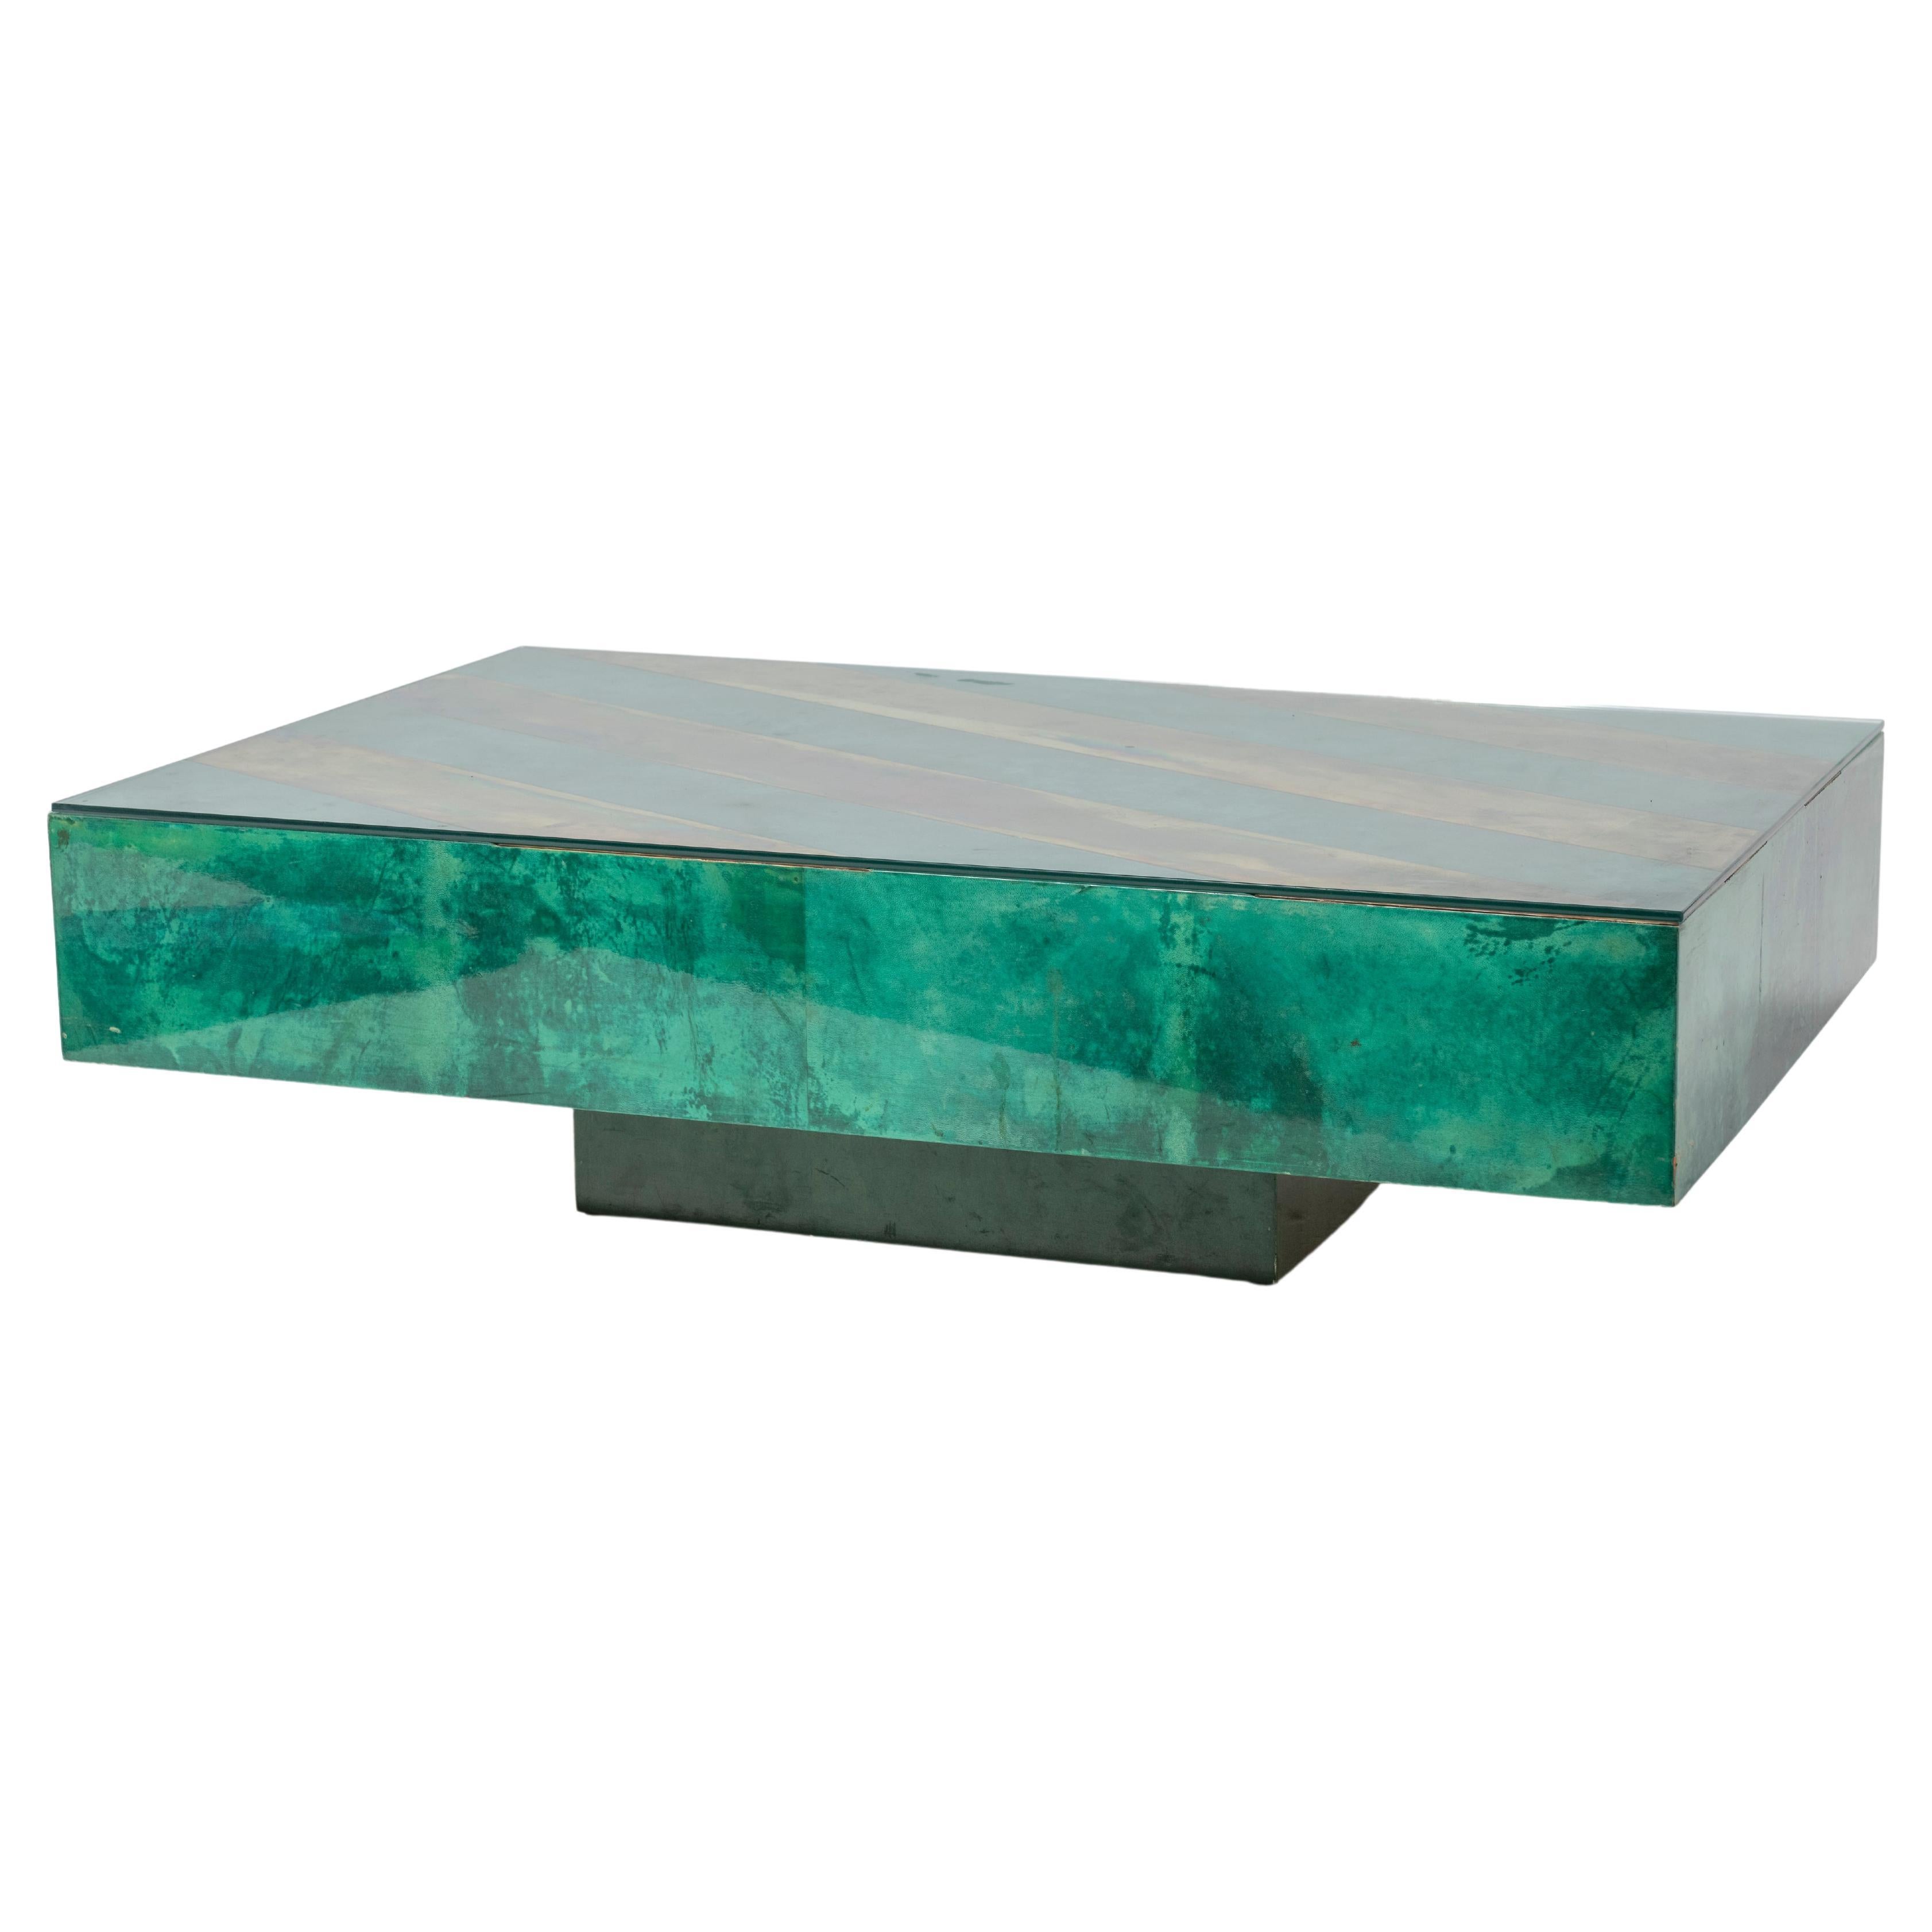 Aldo Tura Coffee Table in Emerald Green Parchment with Brass Inlay, 1979 For Sale